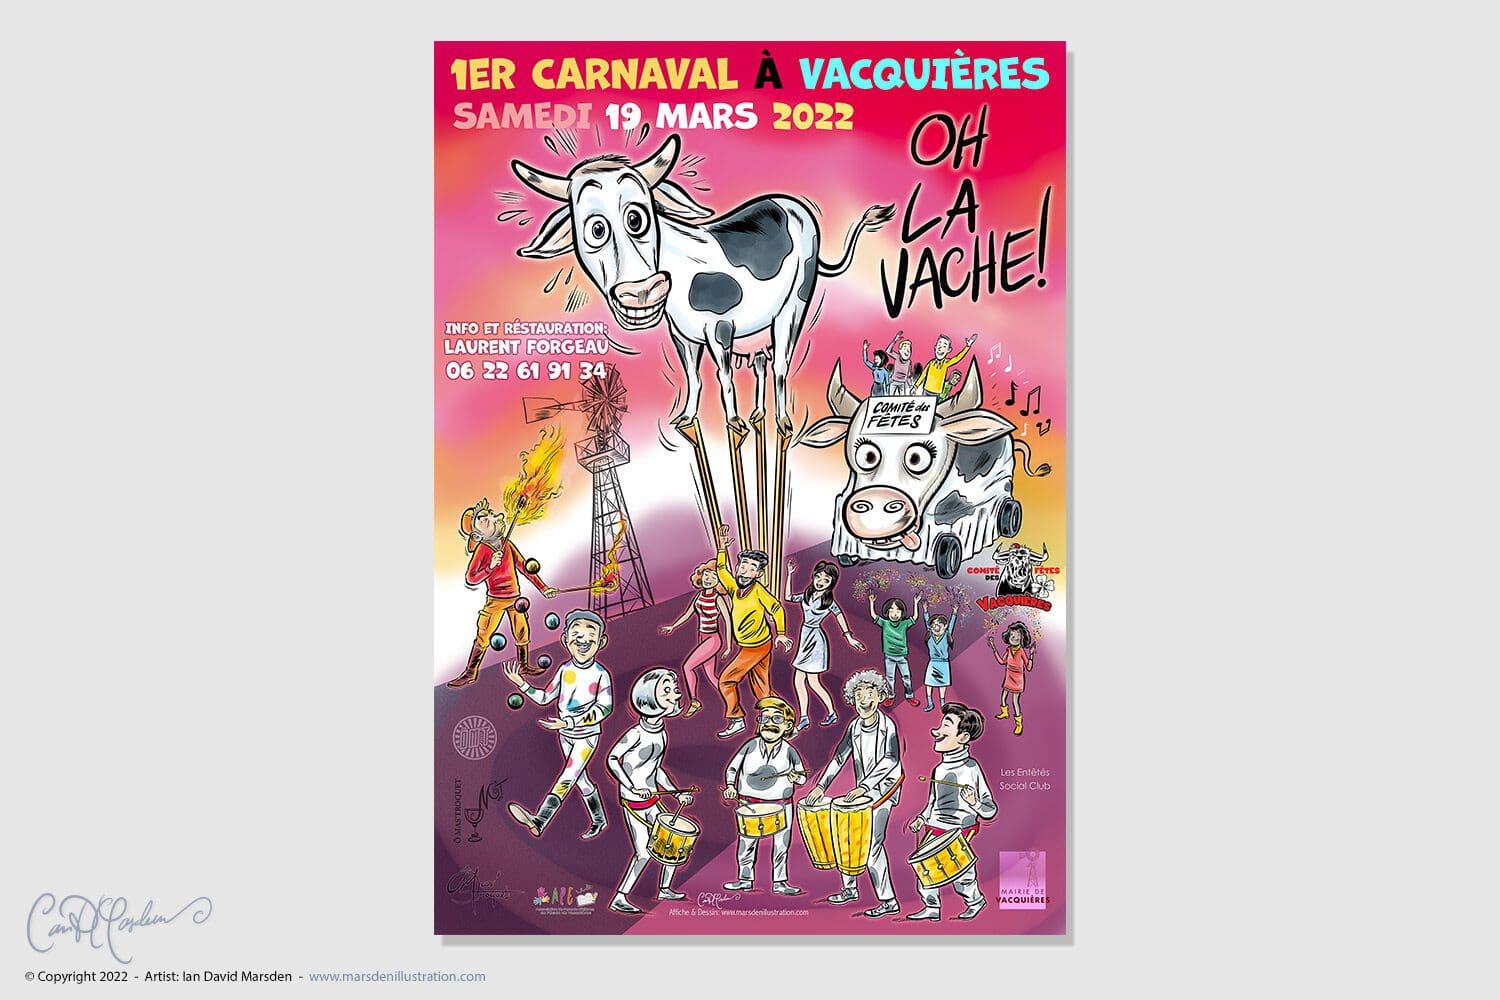 Colorful carnival poster featuring cartoon characters illustrated by Ian David Marsden